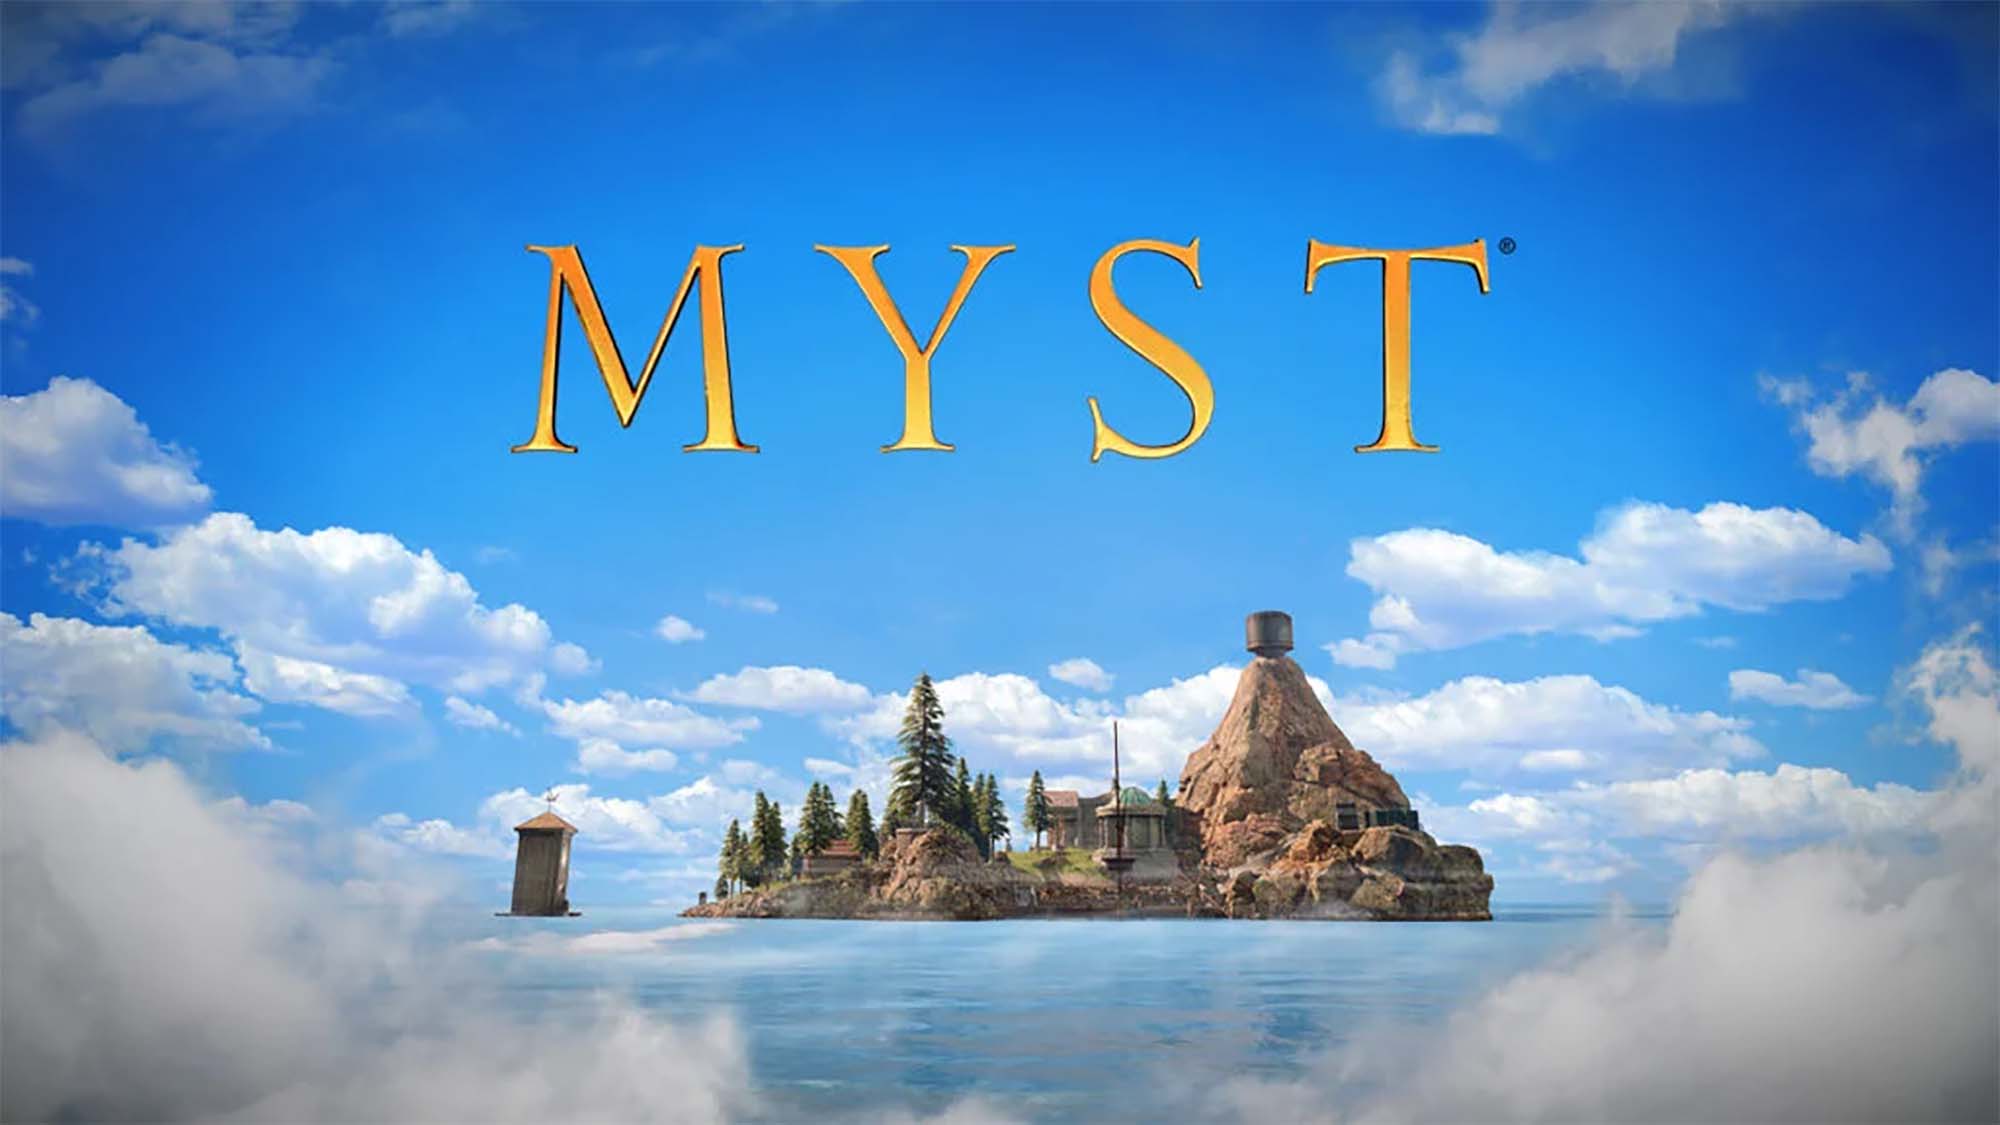 A mythical island under a blue sky with the word Myst written above it